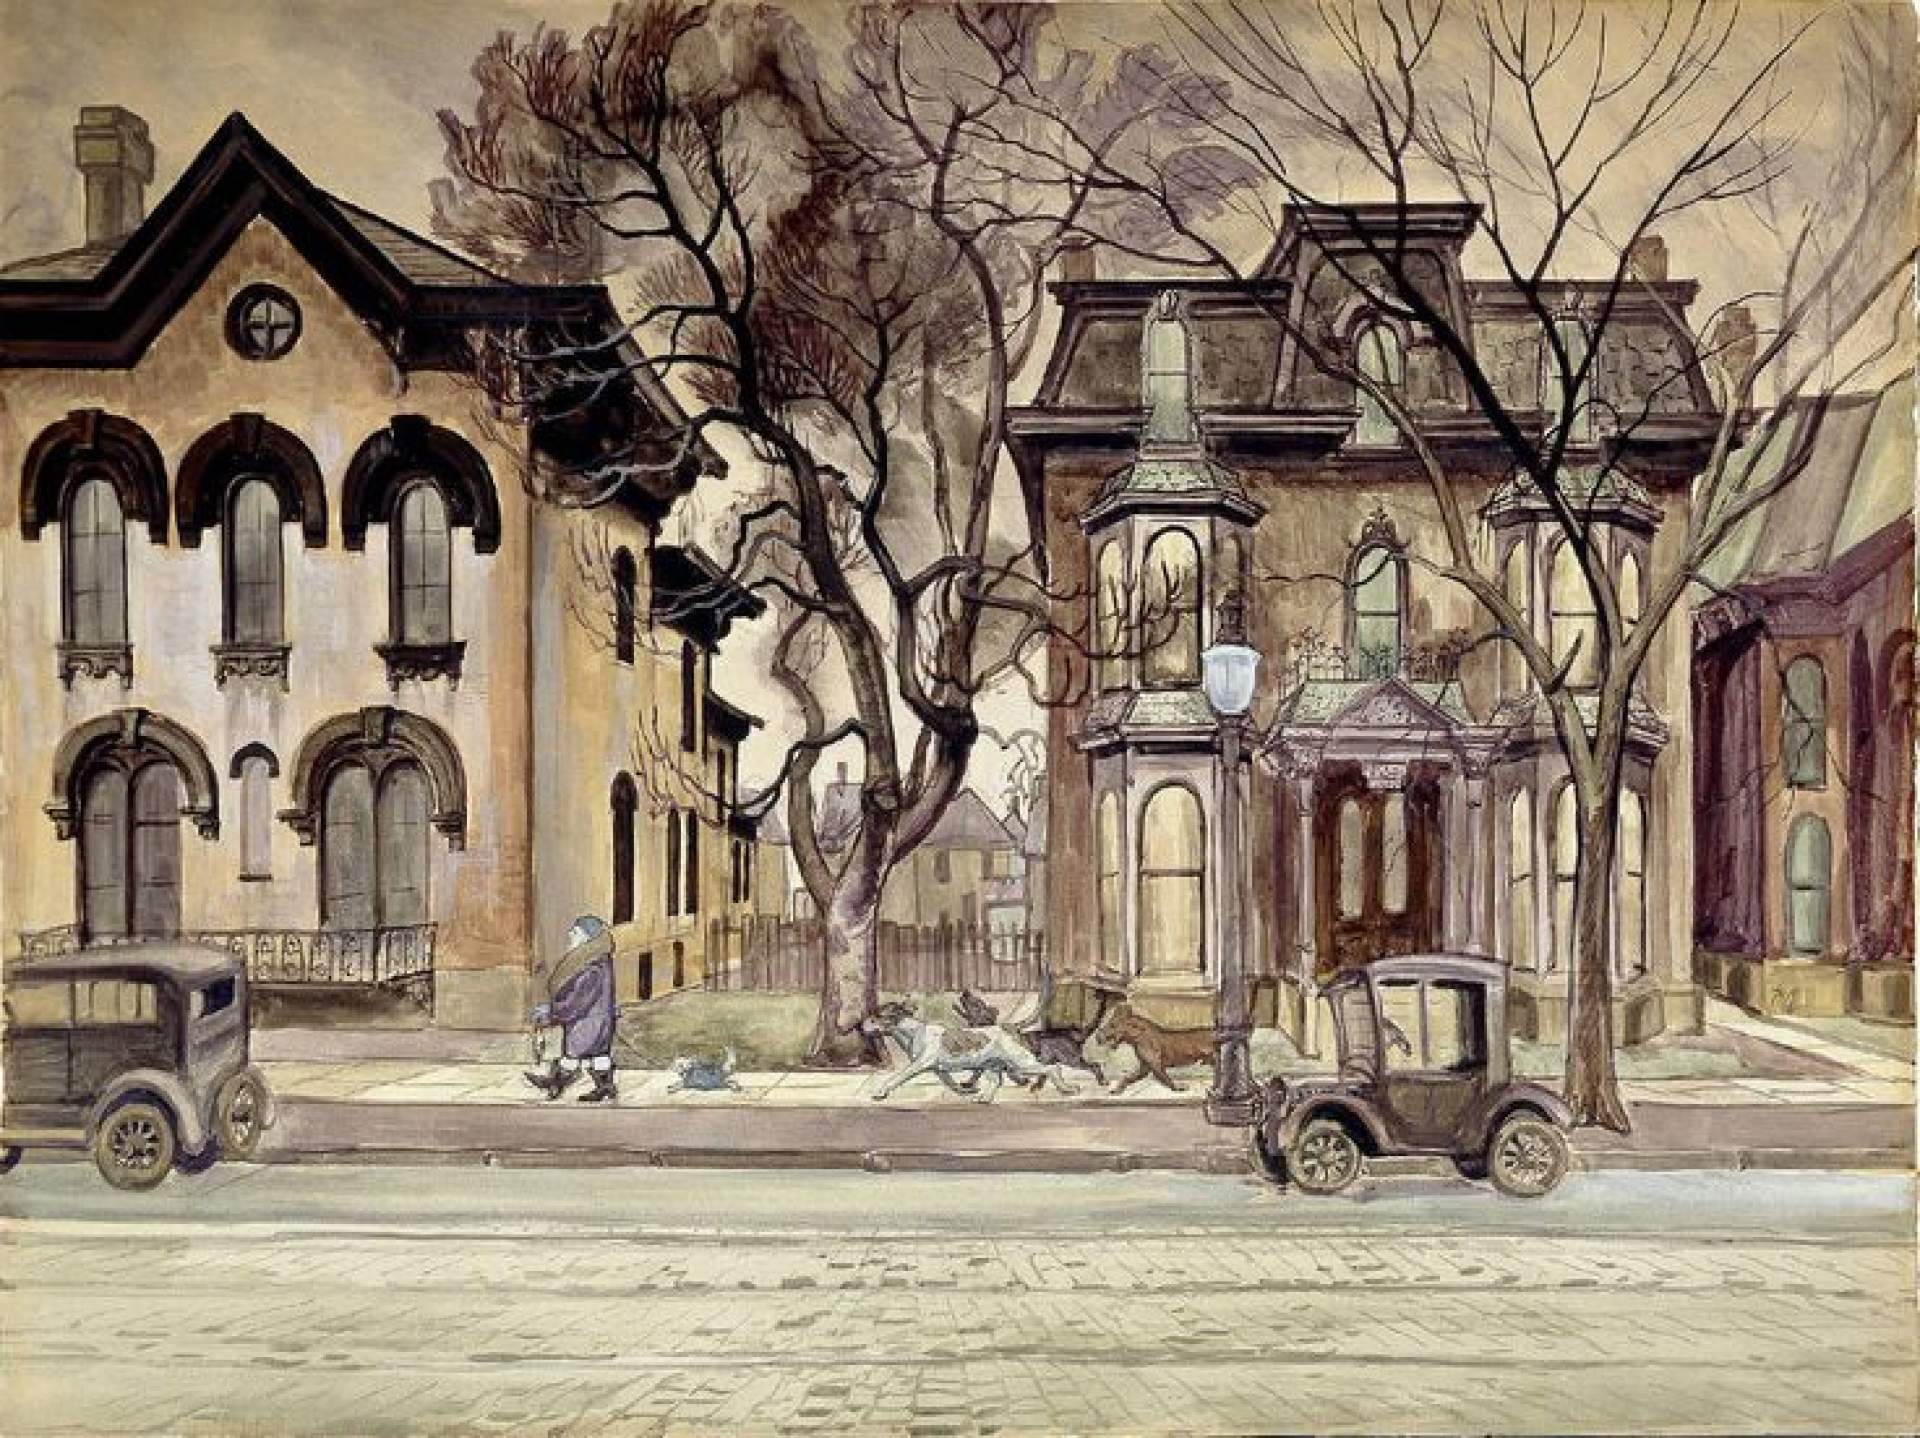 About <em>Promenade</em> by Charles Burchfield from Nancy Weekly